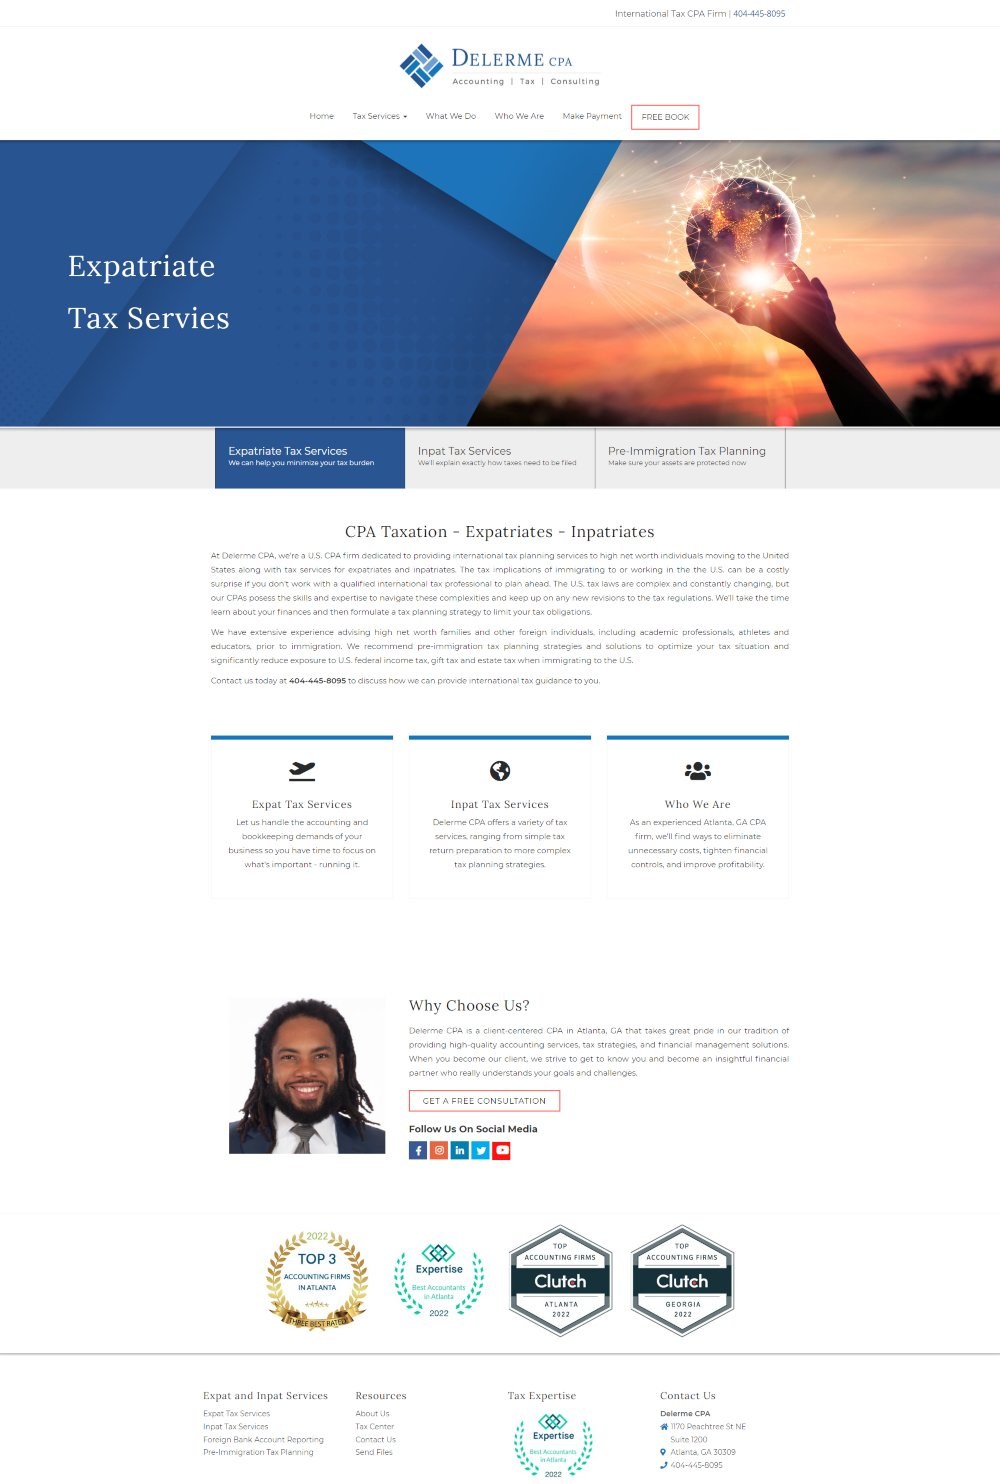 Website of Delerme CPA - Expatriate Tax Services